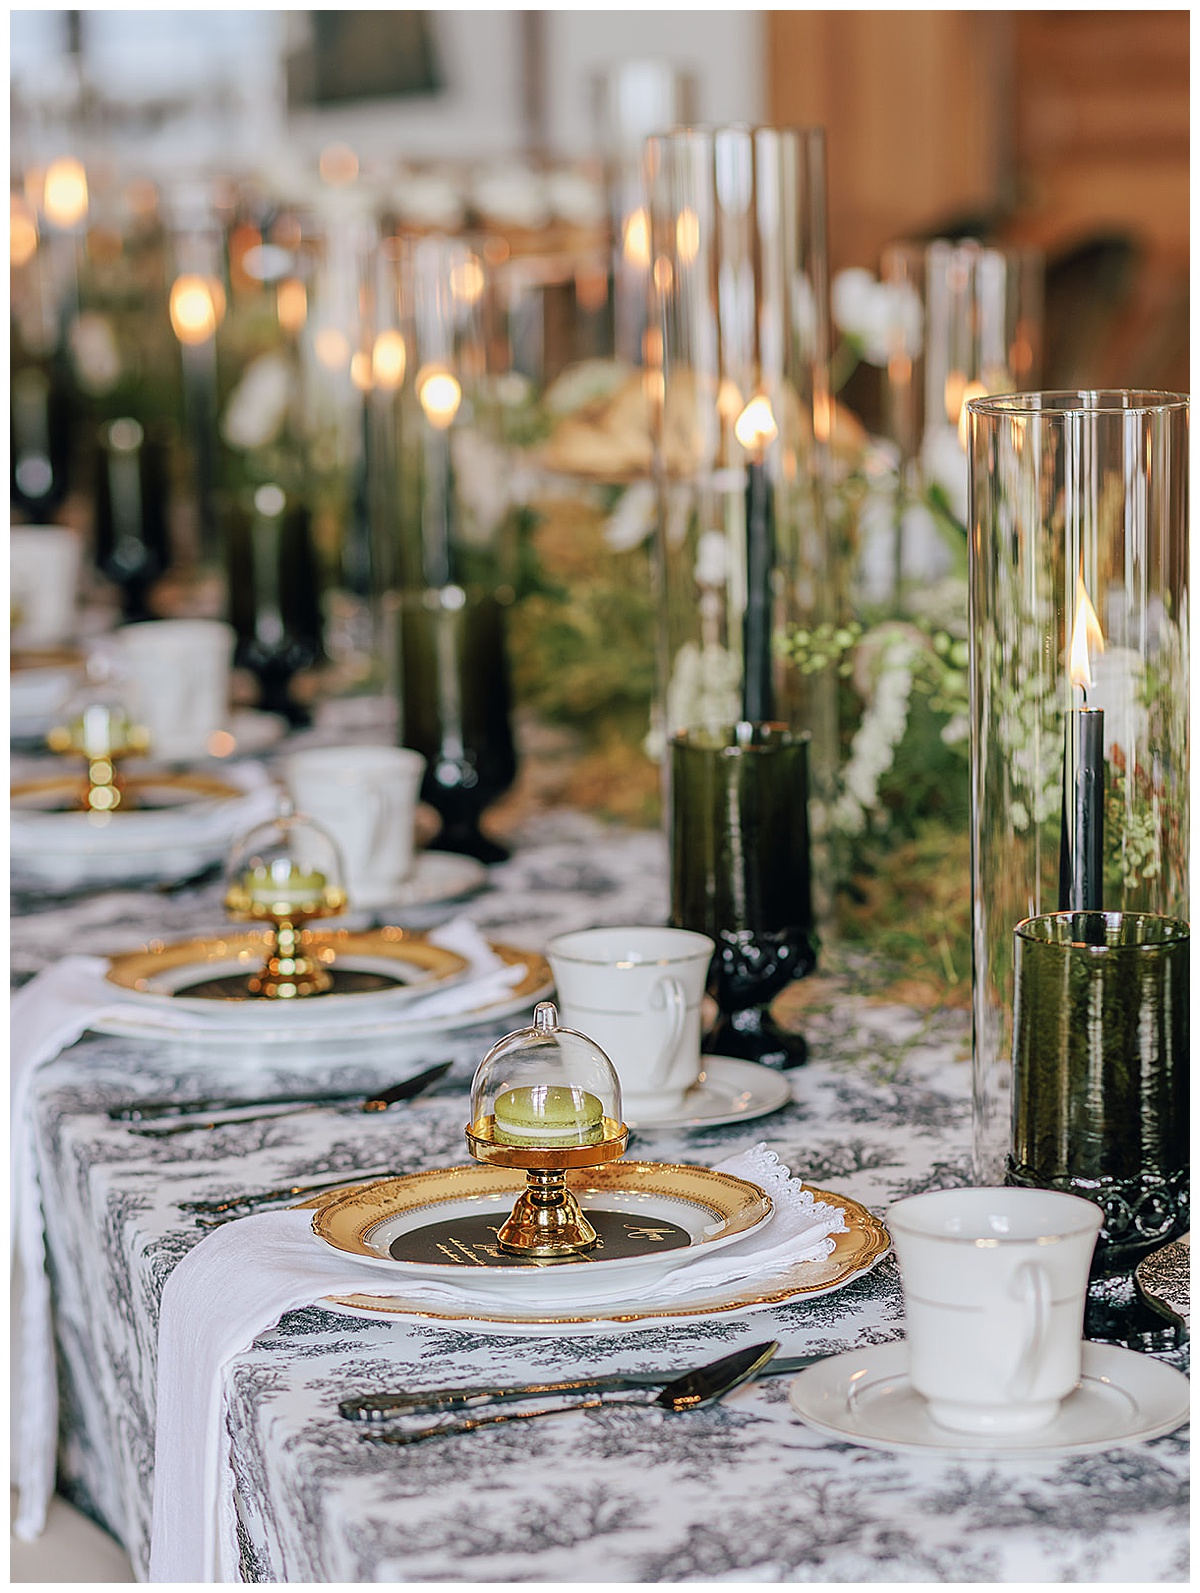 Luxury wedding table setting at one of the top 10 Elegant Michigan Wedding Venues